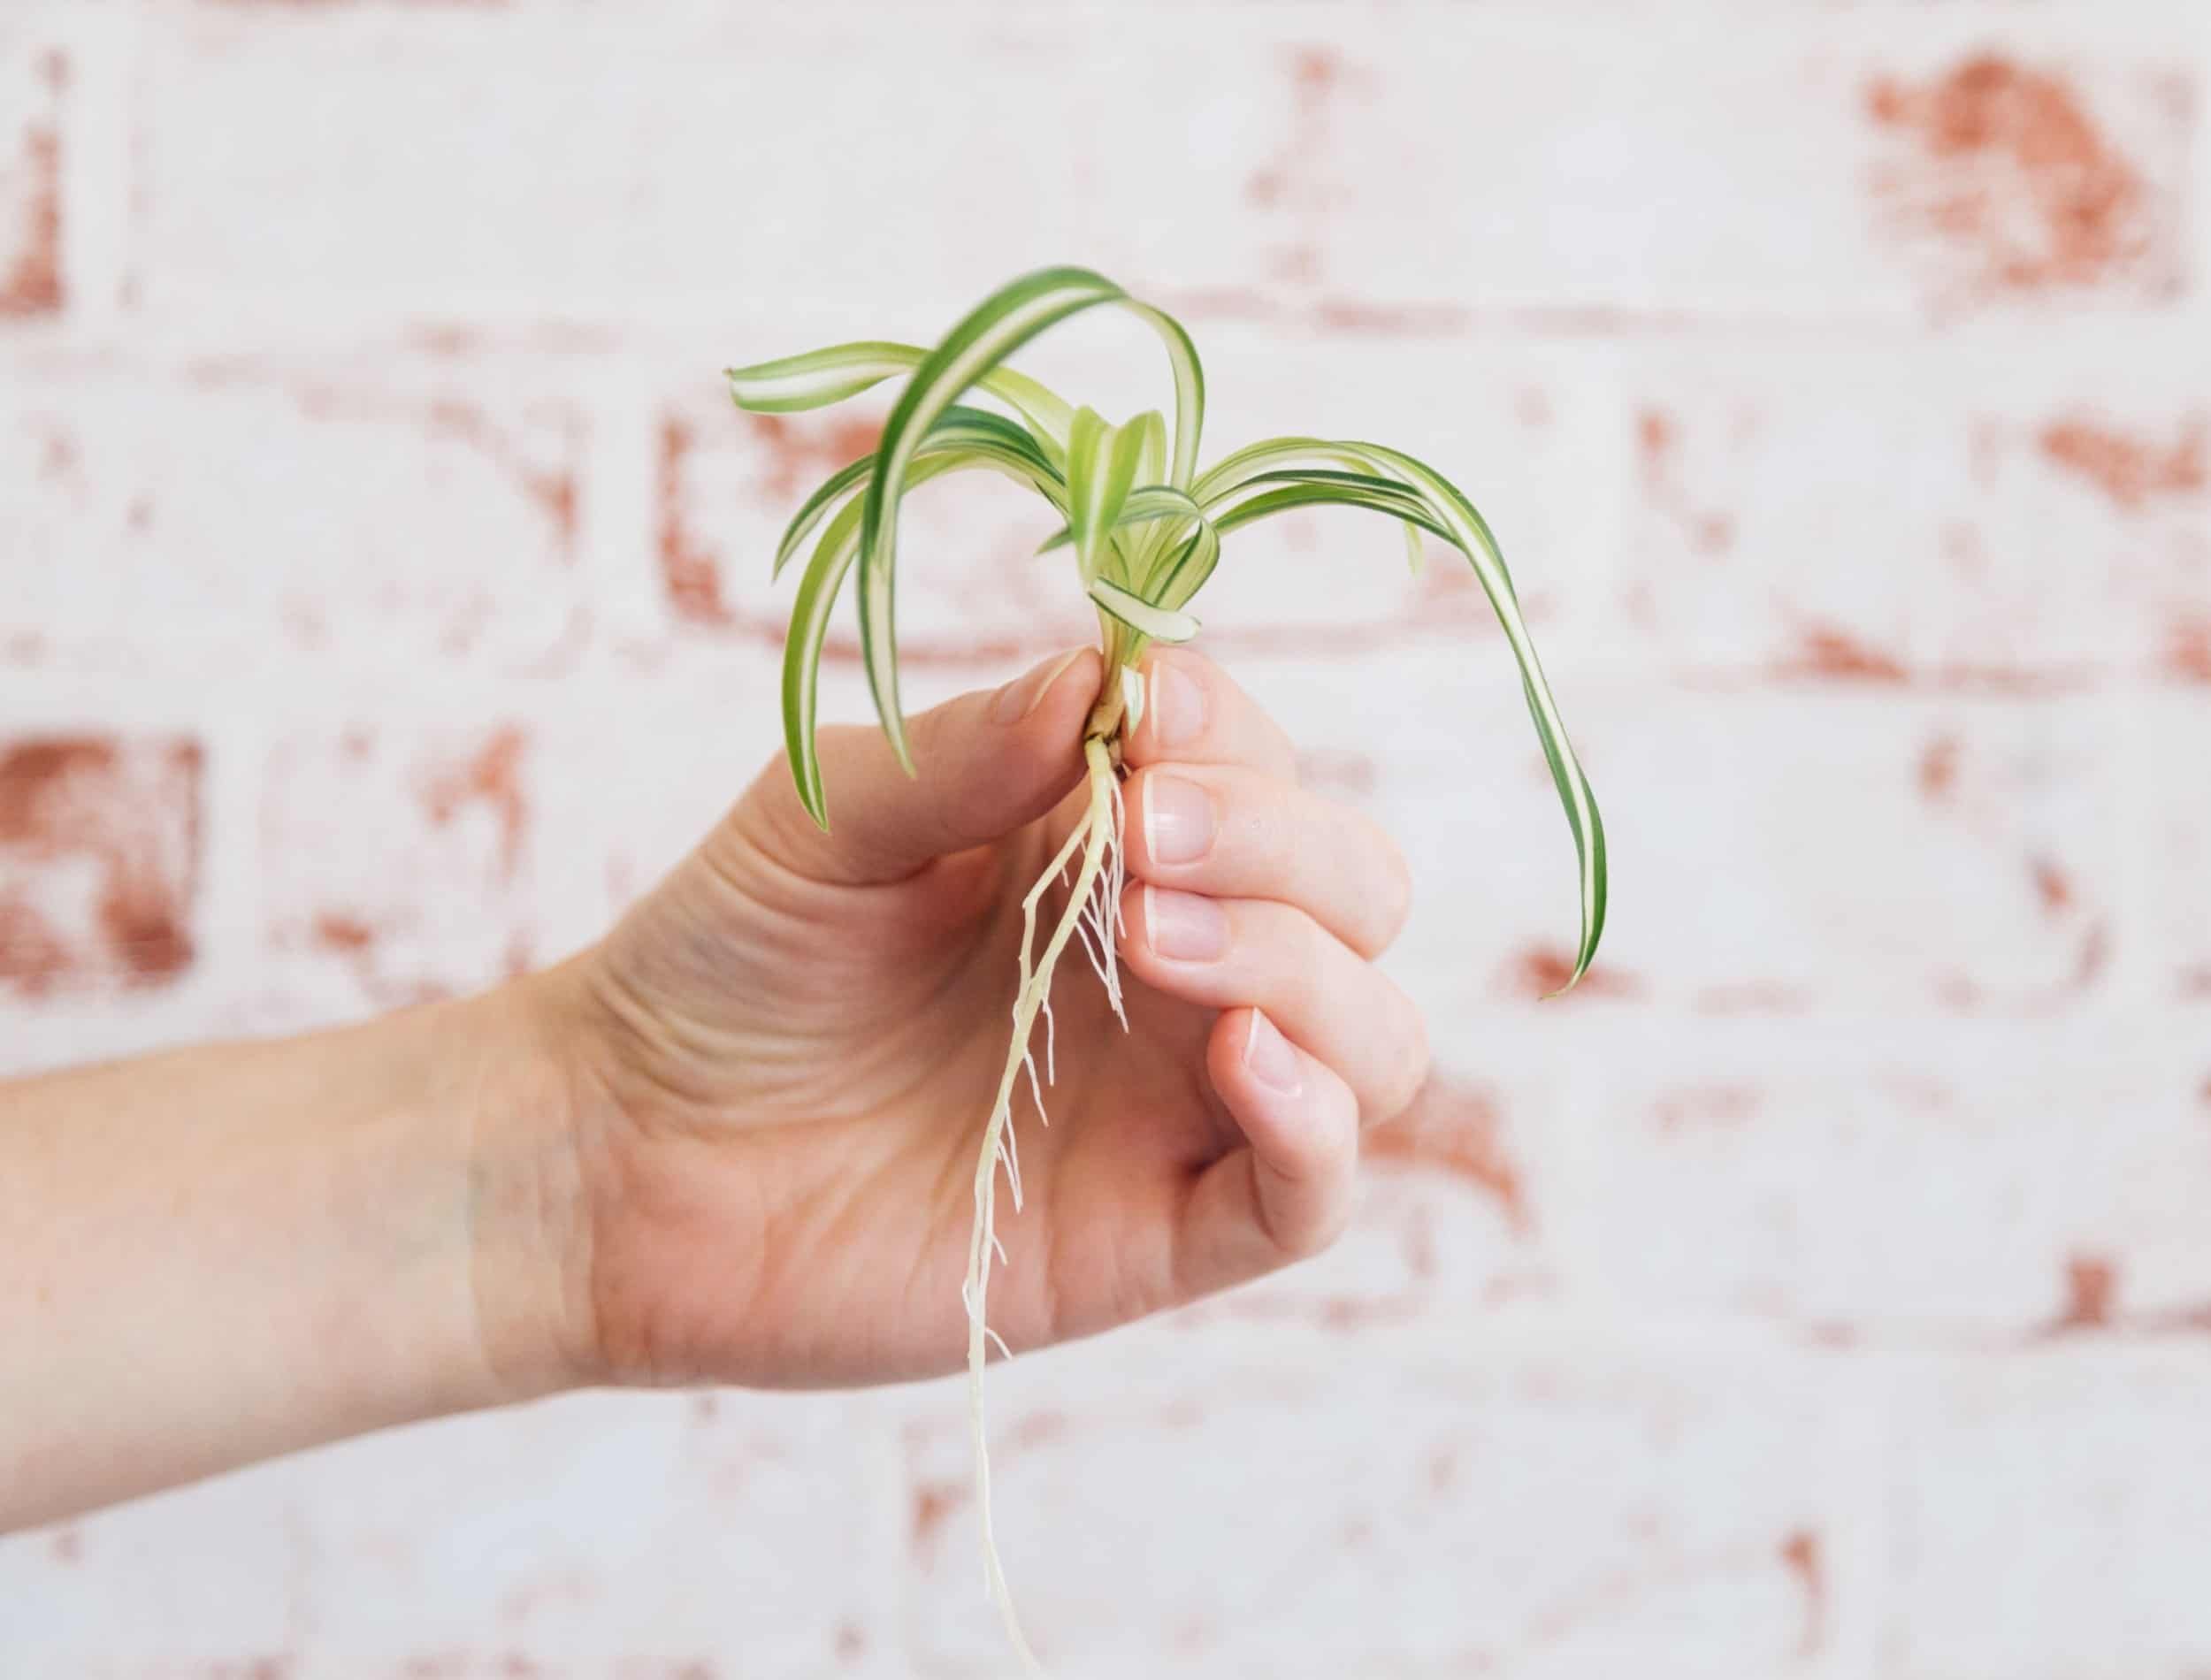 Chlorophytum comosum - Spider Plant Cutting with roots held in female hand against red brick wallpaper background